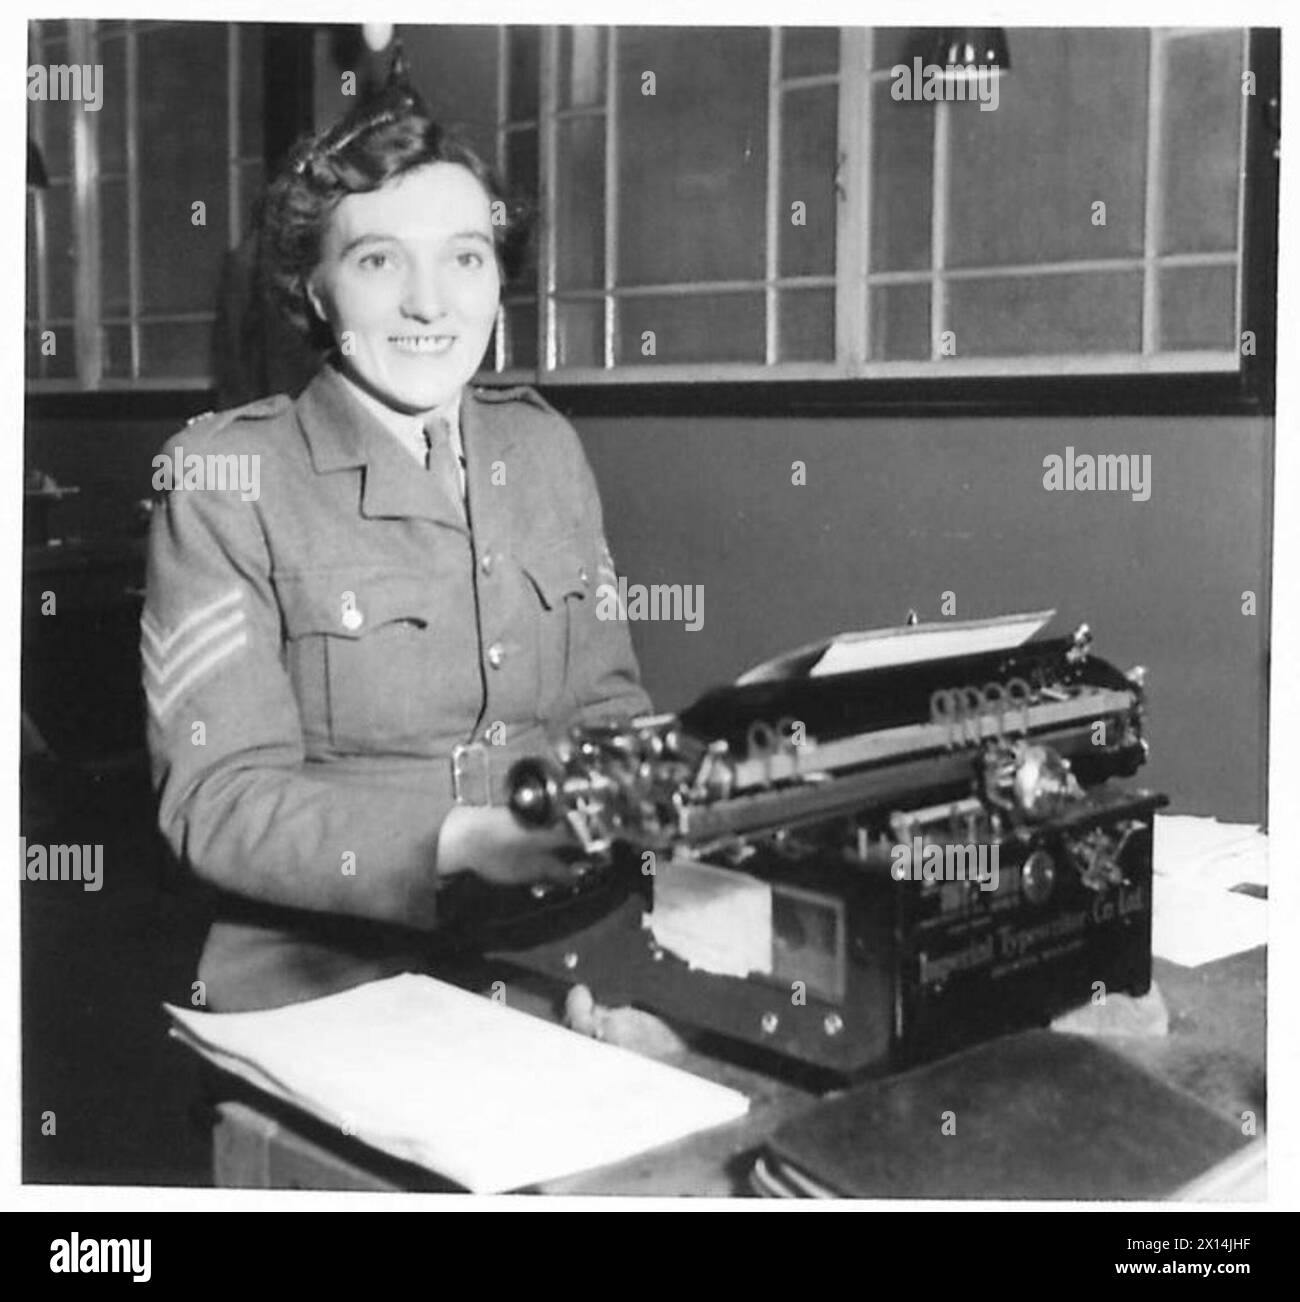 ATS RECRUITING PHOTOGRAPHS - Sgt. Margery Chadwin, aged 29, was a shorthand-typist at Langley Hill, Nottingham. She volunteered in February 1939 for the ATS and was sent to train with the Sherwood Foresters. She is now a typist in the Stores at Chilwell - takes a great interest in her work and going all out for promotion. She said "I would not be out of the ATS for anything, and have never regretted joining the Service". CHILWELL ORDNANCE DEPOT. Sgt.M. Chadwin typing out a list of stores British Army Stock Photo